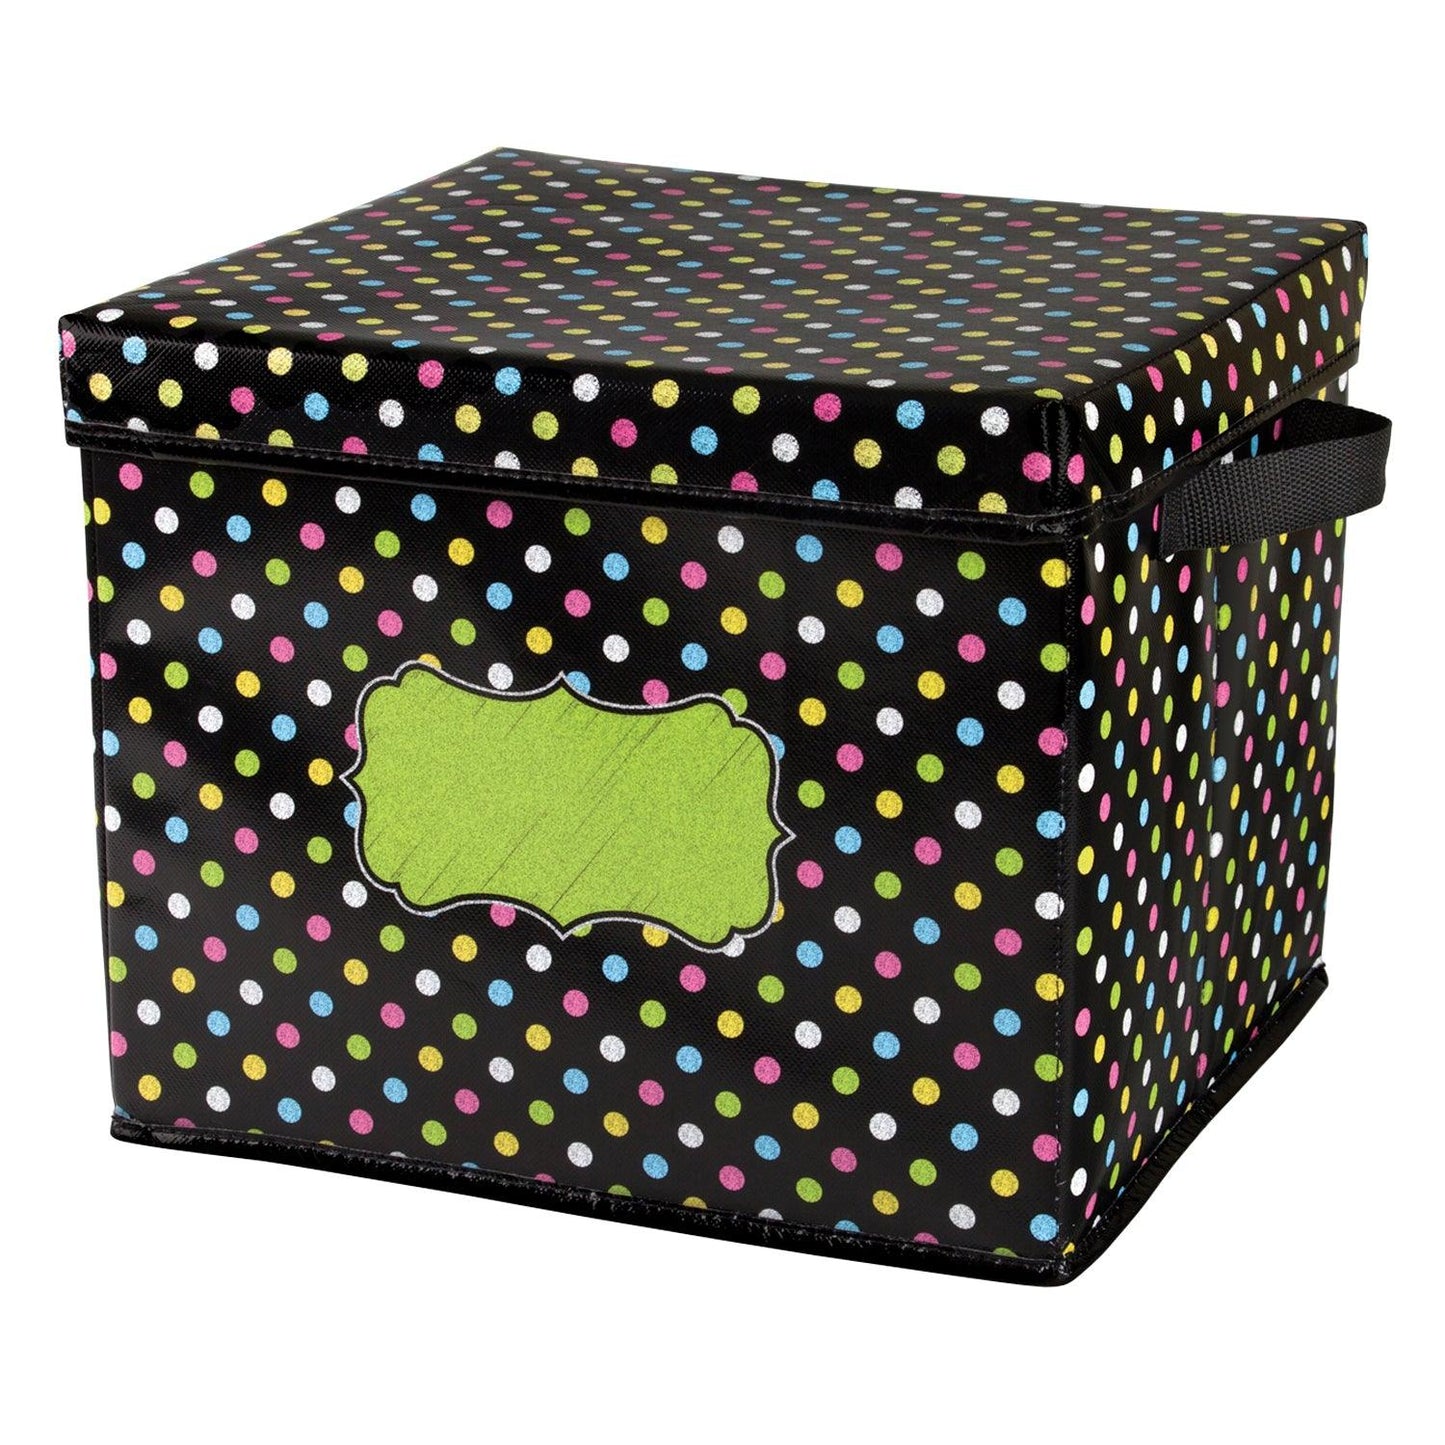 Chalkboard Brights Storage Box with Lid, Pack of 2 - Loomini